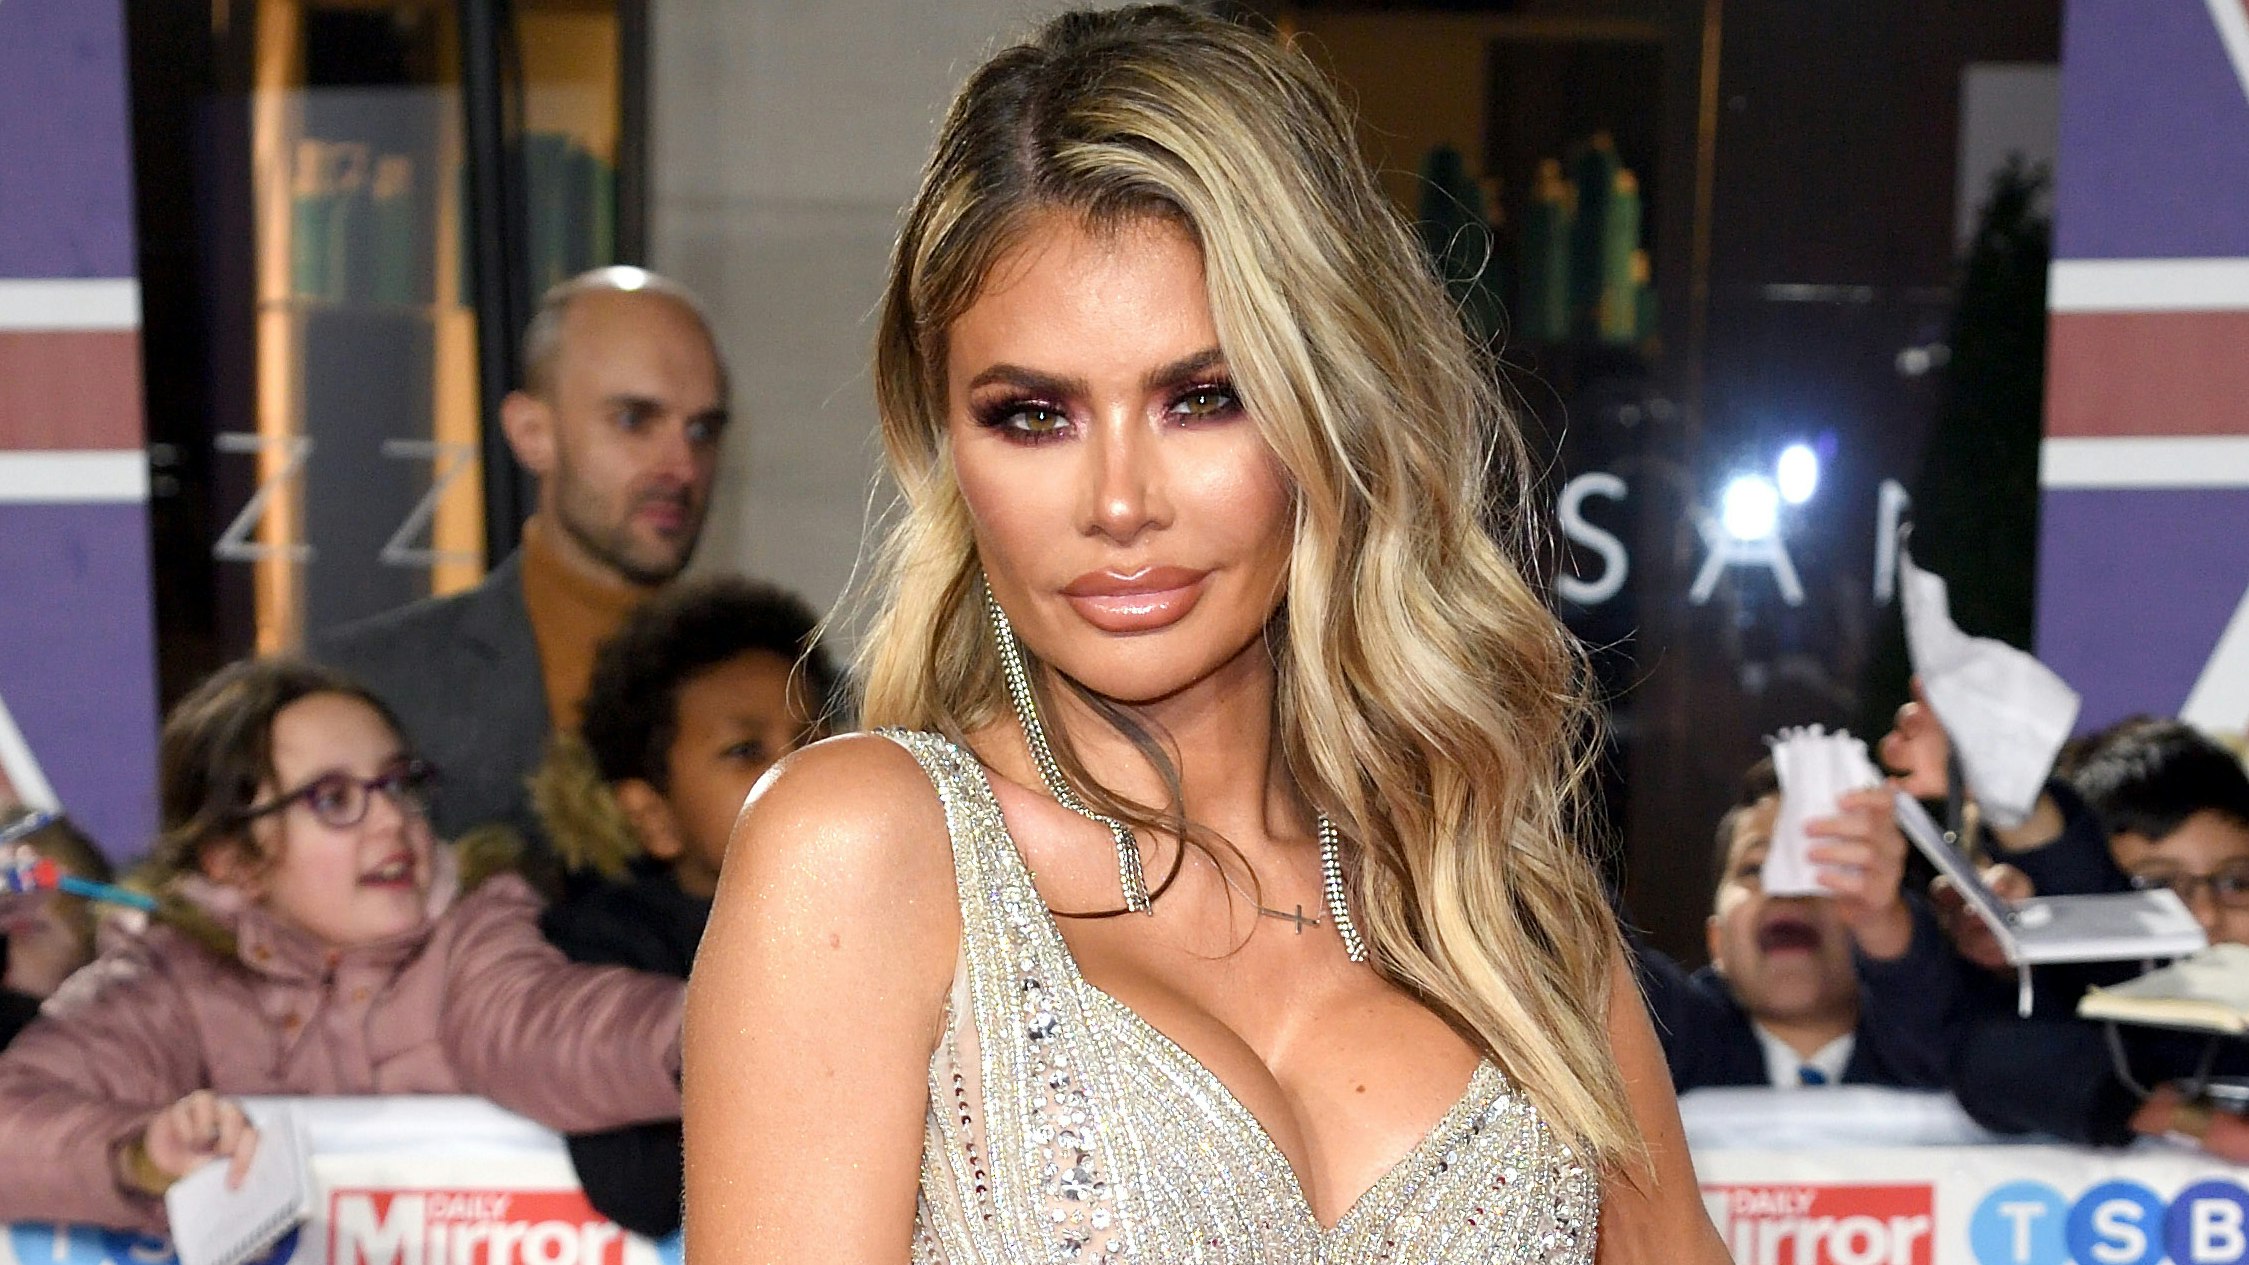 TOWIE's Chloe Sims hits back after calls for her to quit